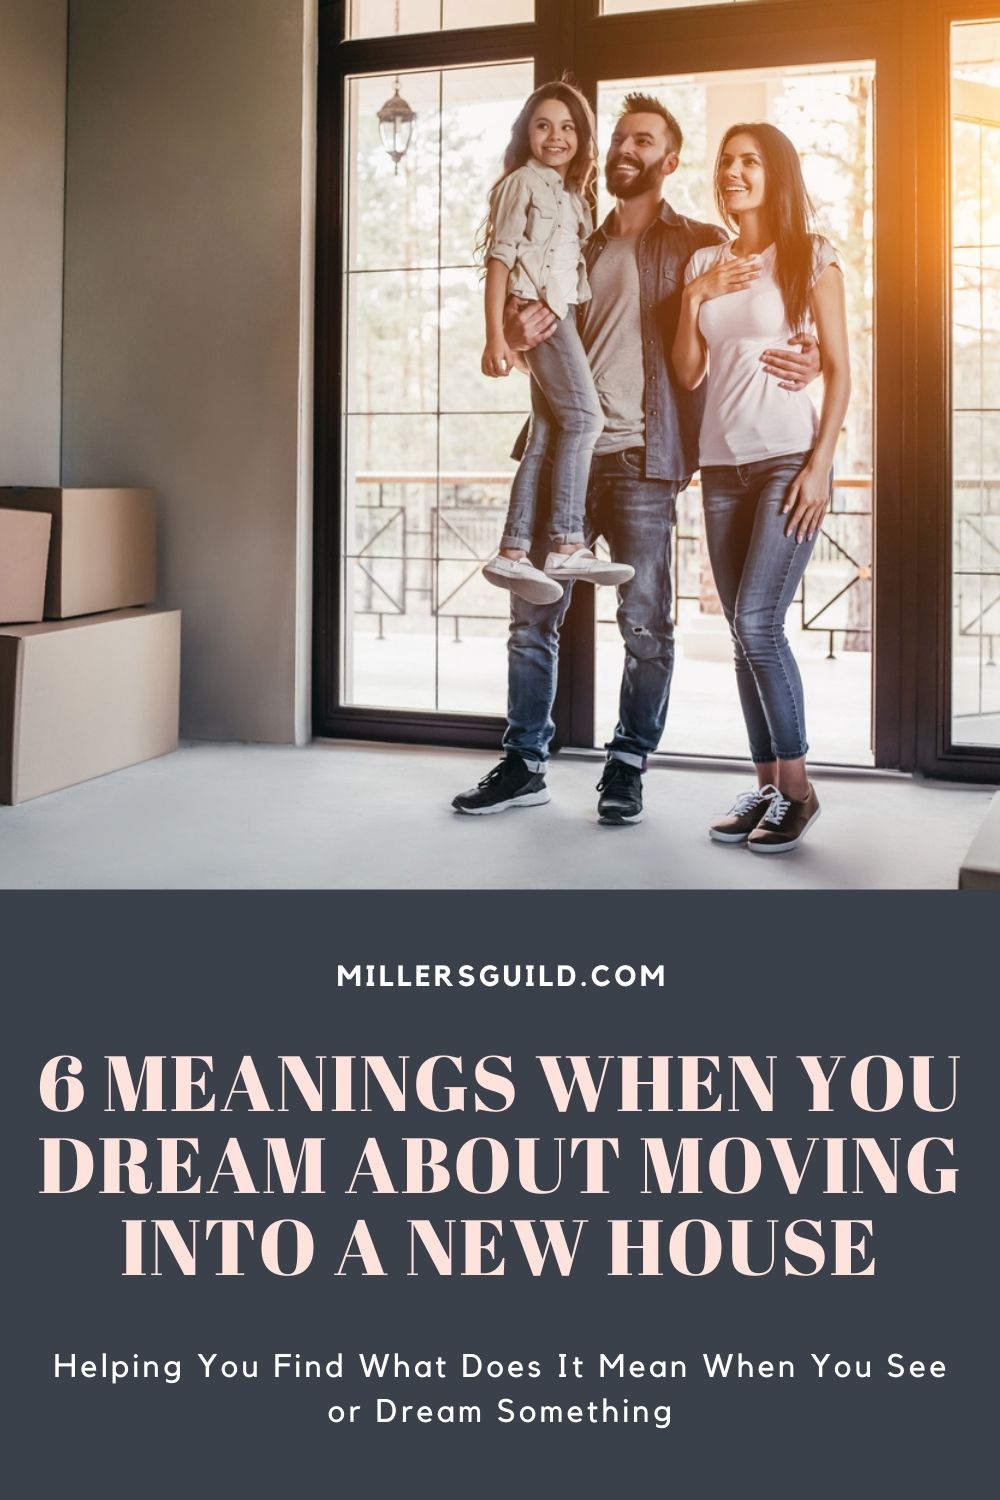 6 Meanings When You Dream About Moving Into a New House 2